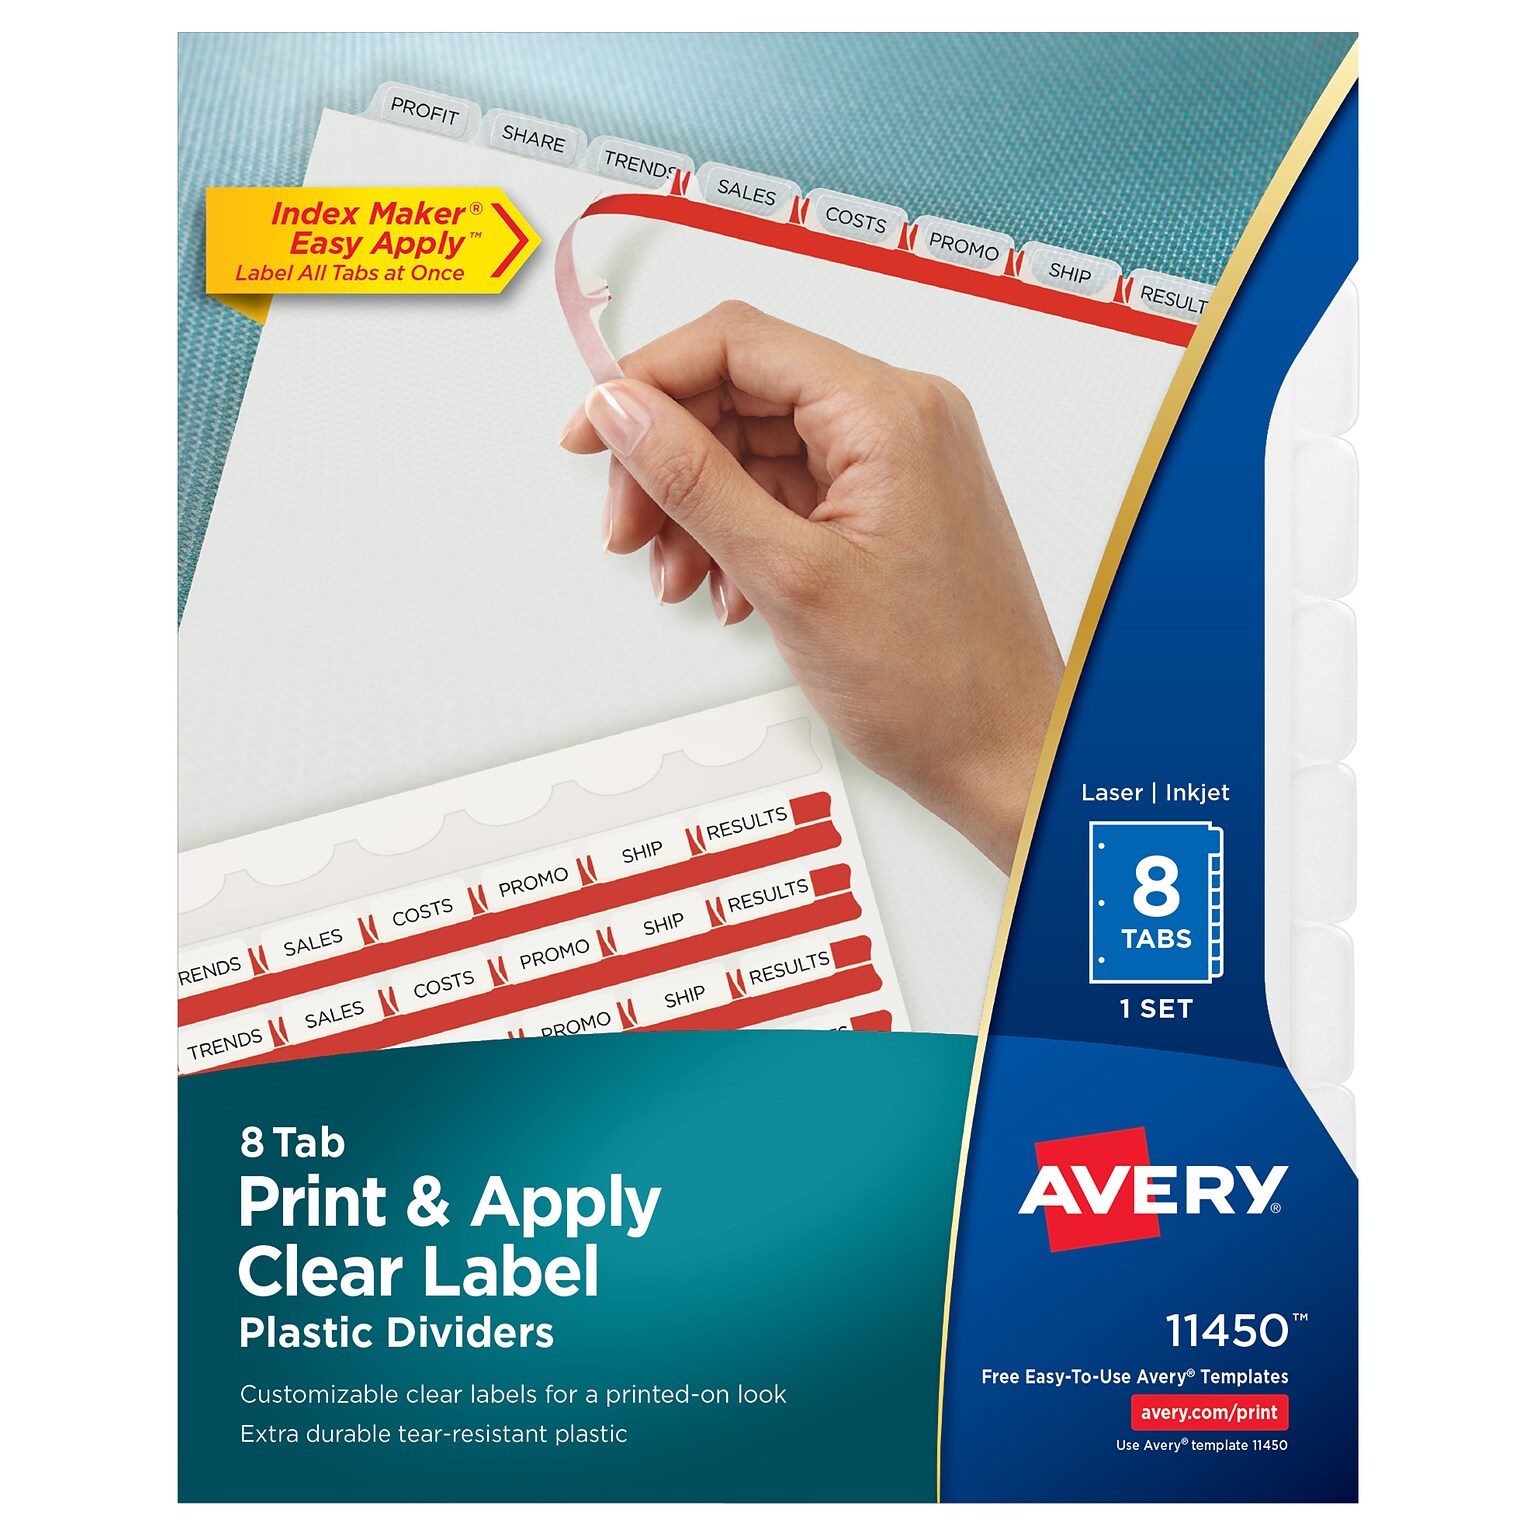 Avery Index Maker Plastic Dividers with Print & Apply Label Sheets, 8 Tabs, Frosted White (11450)